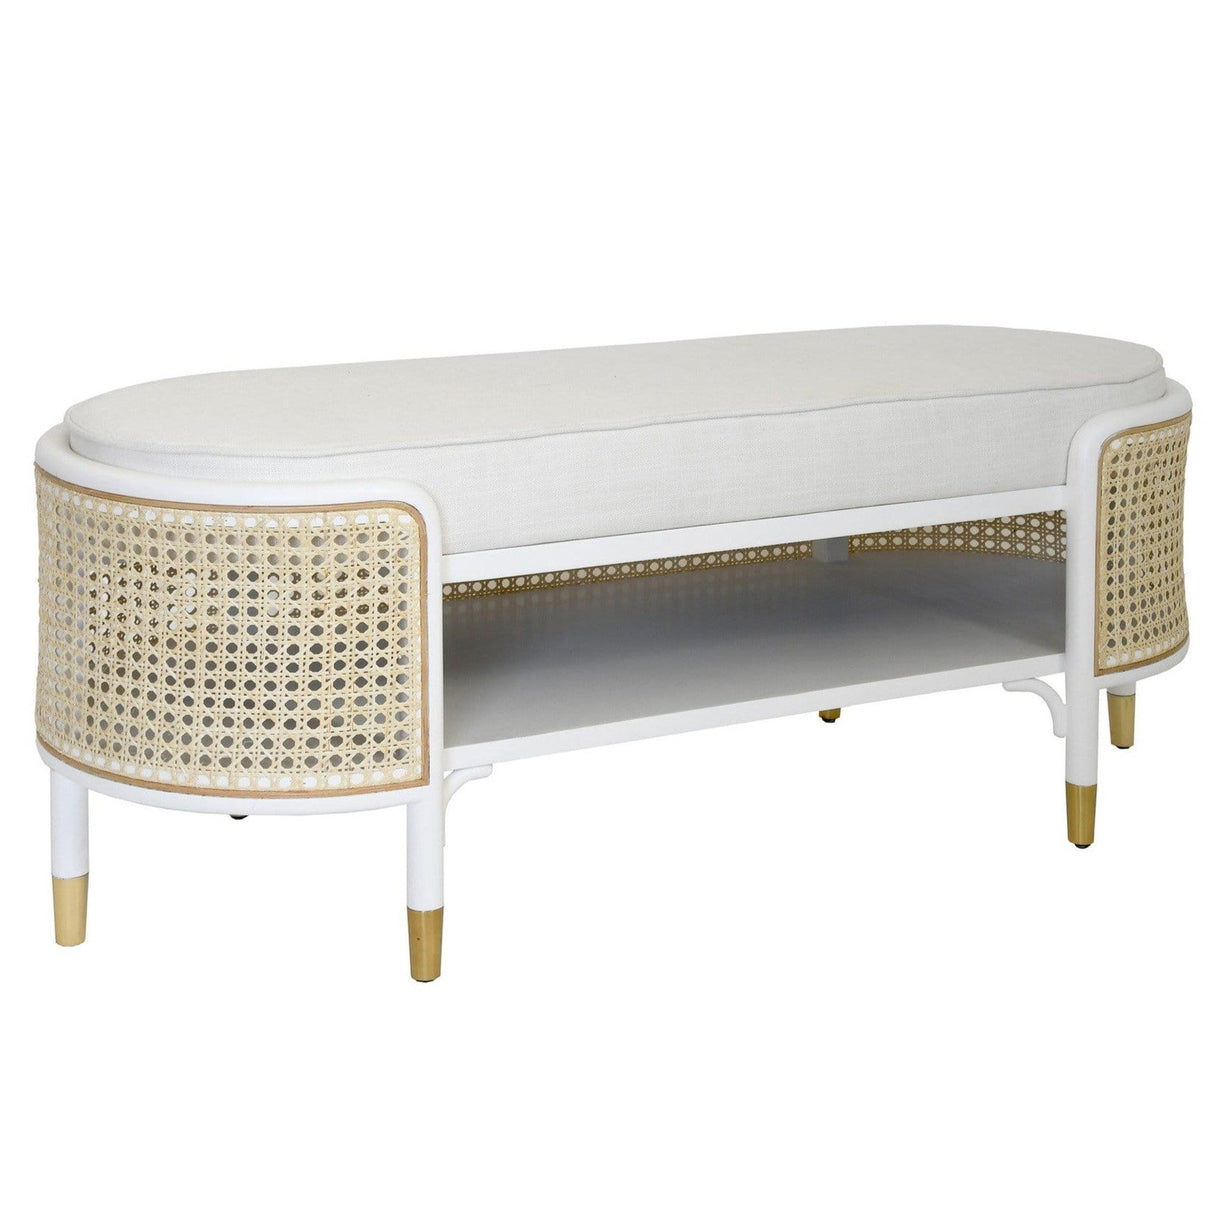 Worlds Away Beale Bench Furniture worlds-away-beale-bench-w